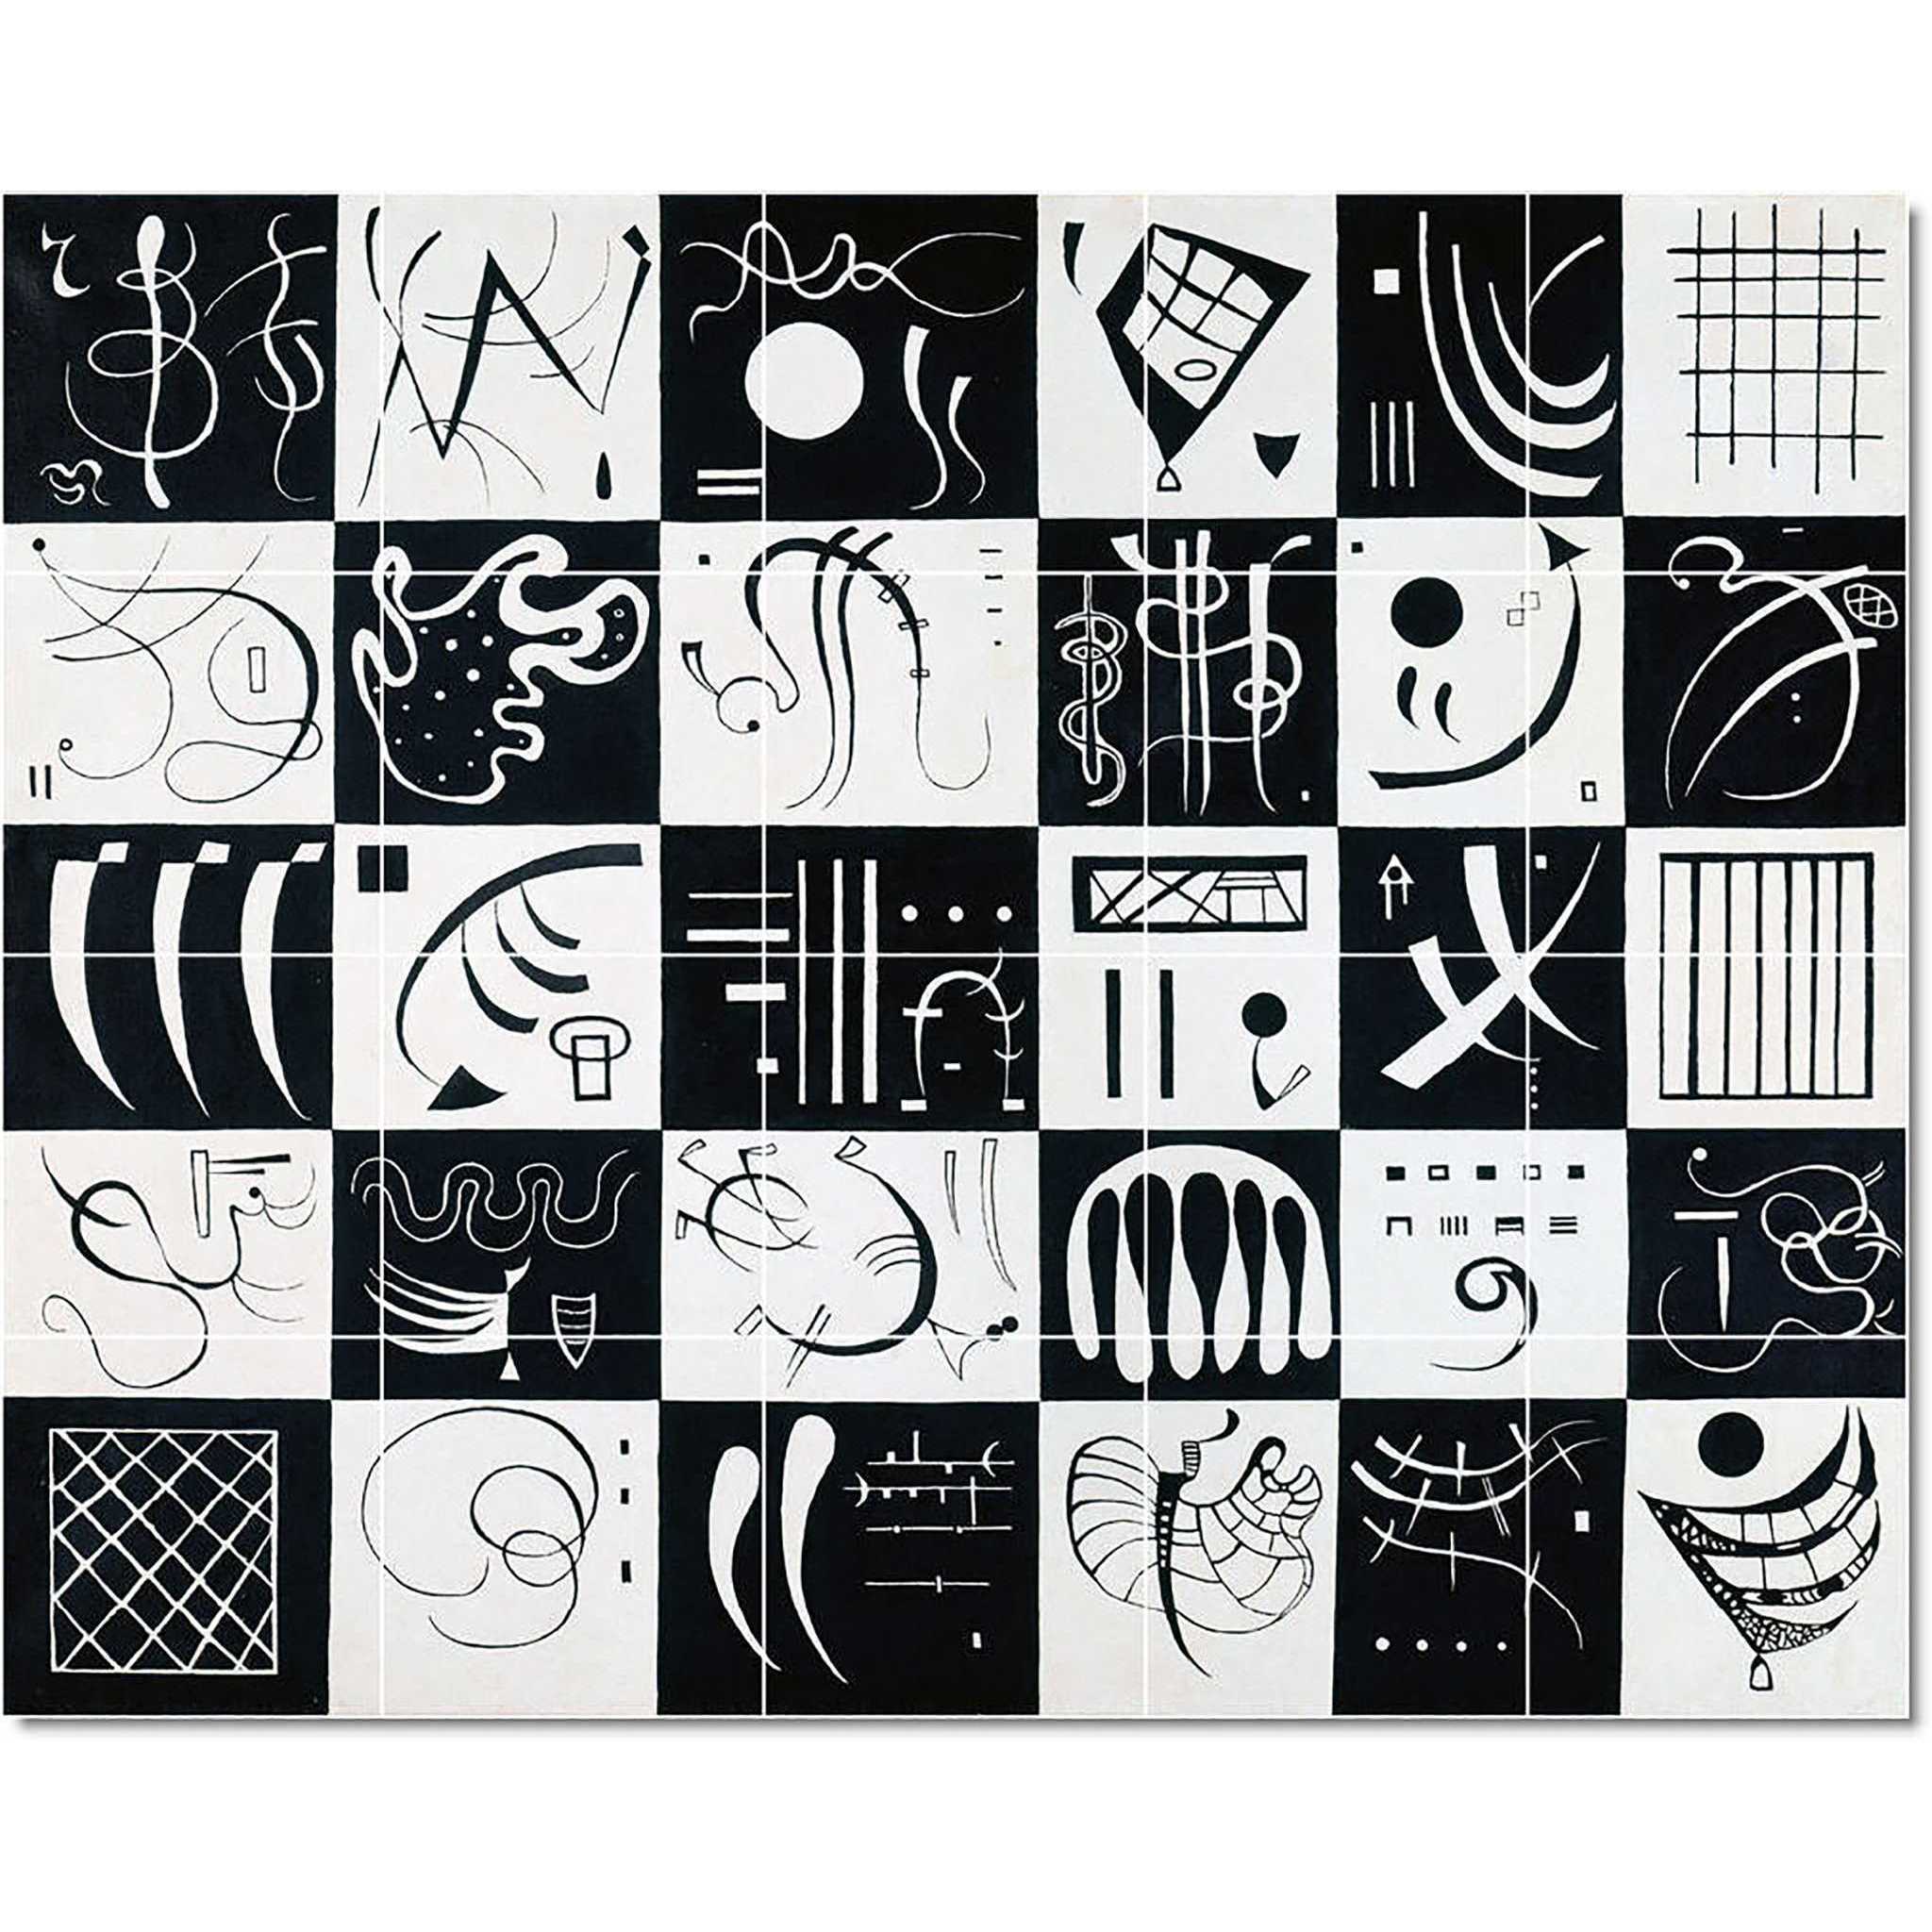 wassily kandinsky abstract painting ceramic tile mural p22738